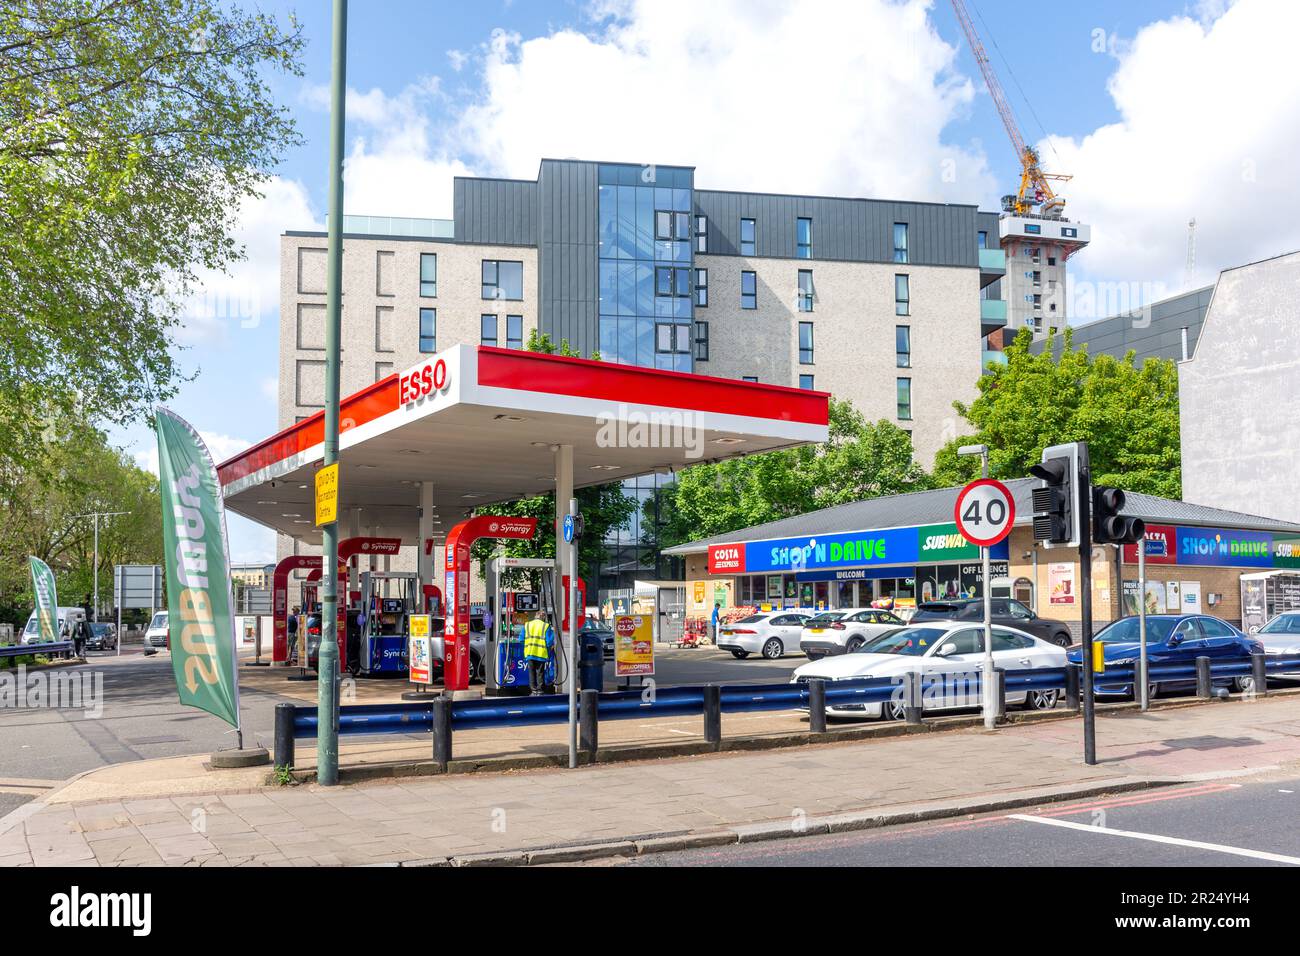 Esso Rontec Chiswick Flyover petrol station, Great West Road, Chiswick, London Borough of Hounslow, Greater London, England, United Kingdom Stock Photo